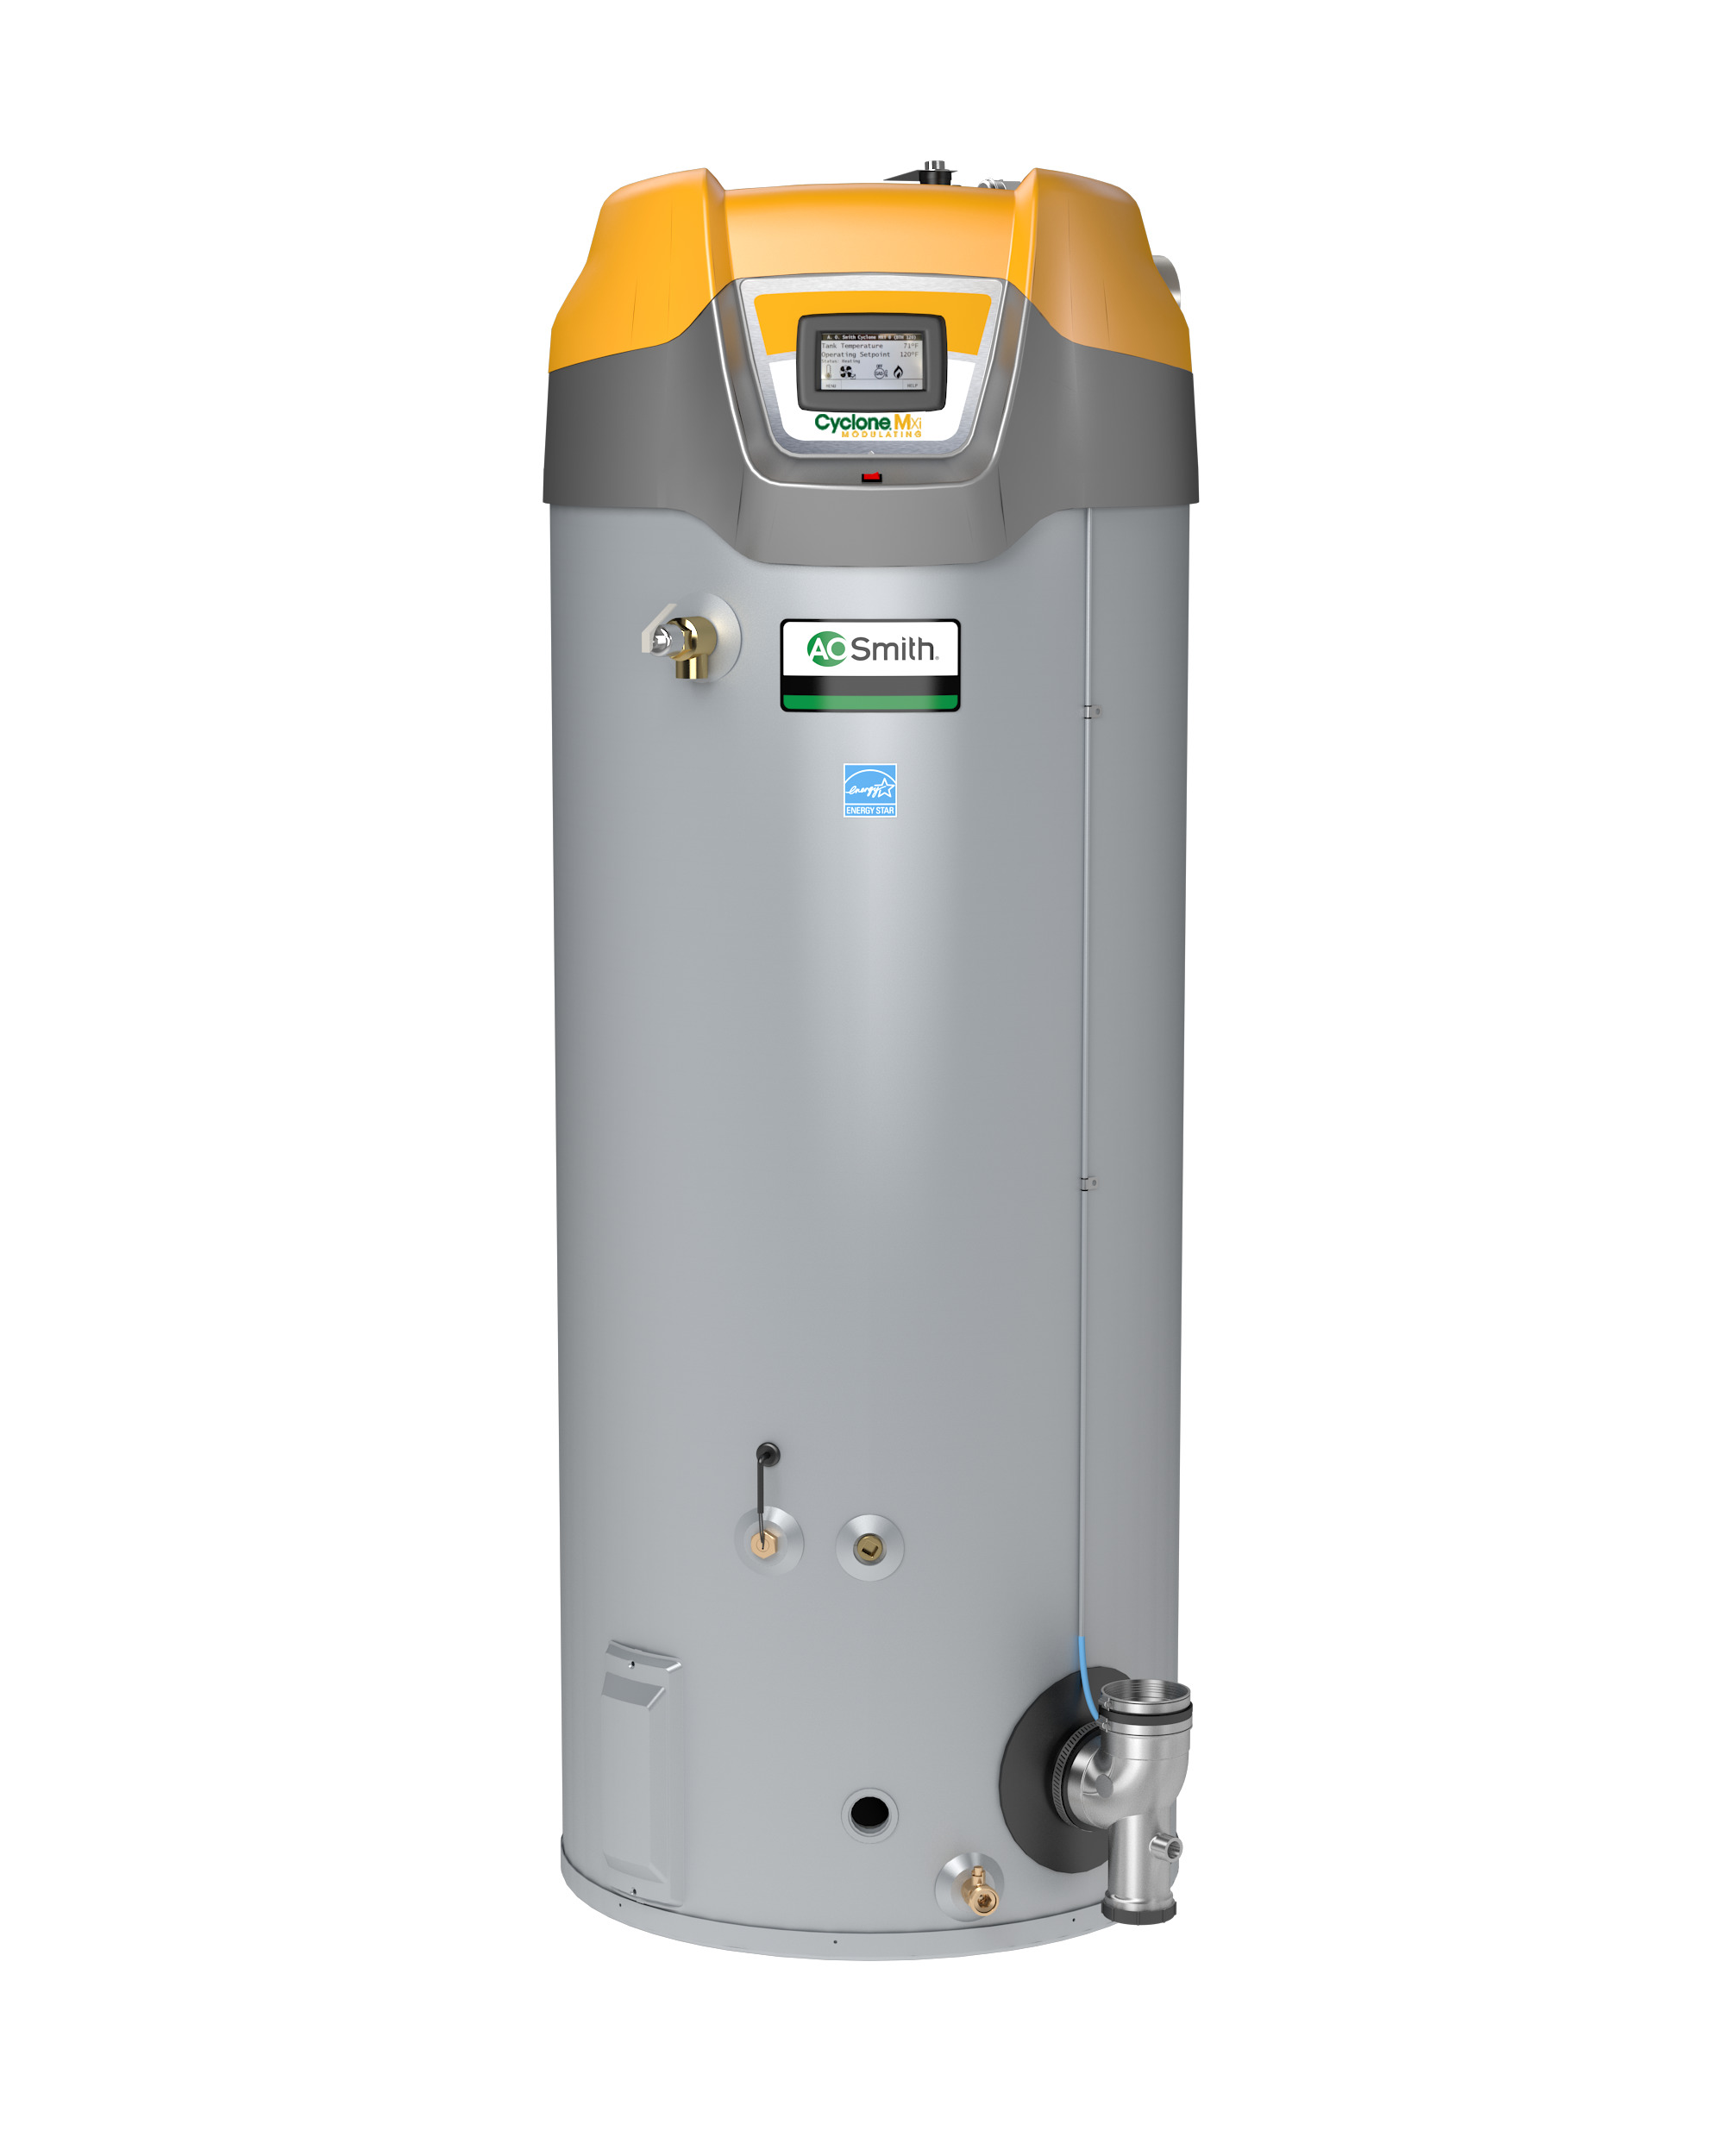 AO SMITH BTH-120A: 60 GALLON, 125,000 BTU, ASME, 3" VENT, UP TO 95% THERMAL EFFICIENCY, NATURAL GAS, CYCLONE Mxi MODULATING COMMERCIAL GAS WATER HEATER